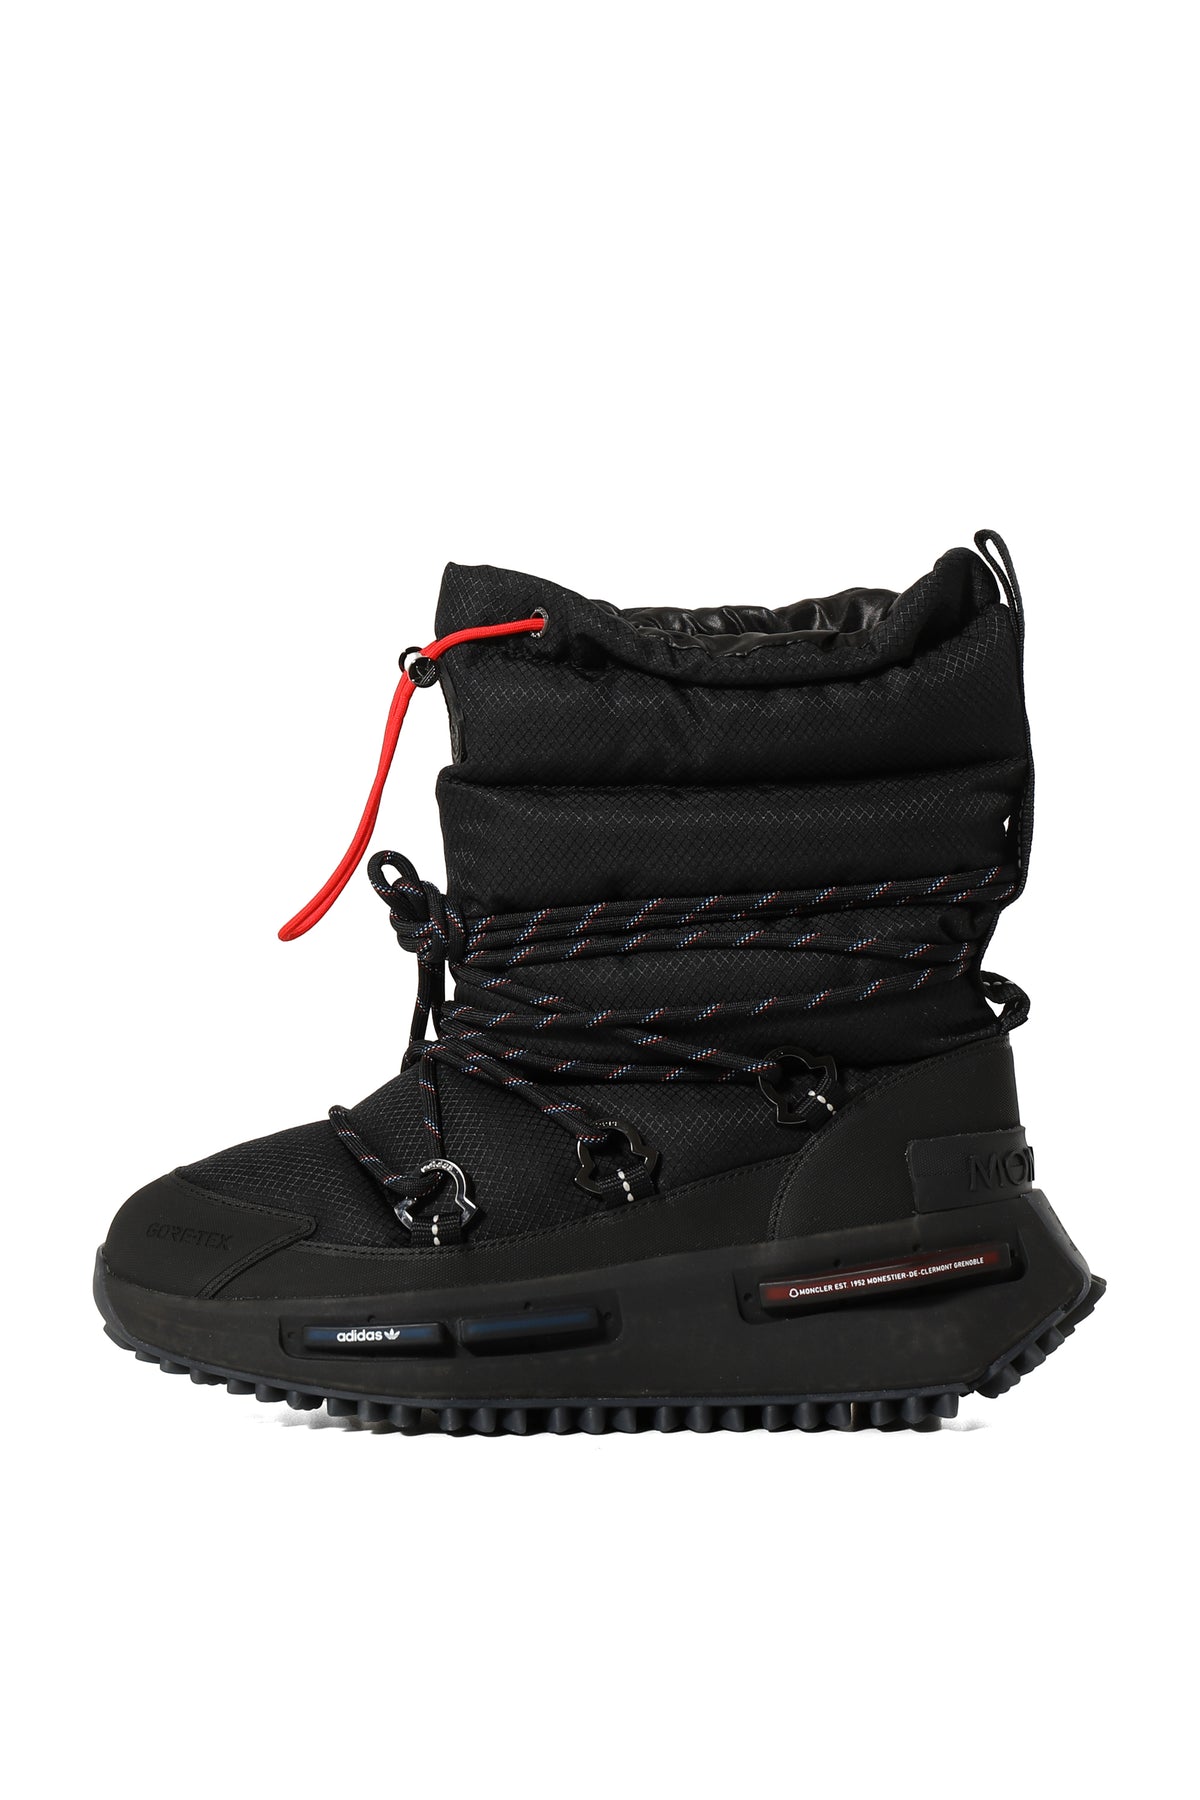 MONCLER NMD MID ANKLE BOOTS / BLK